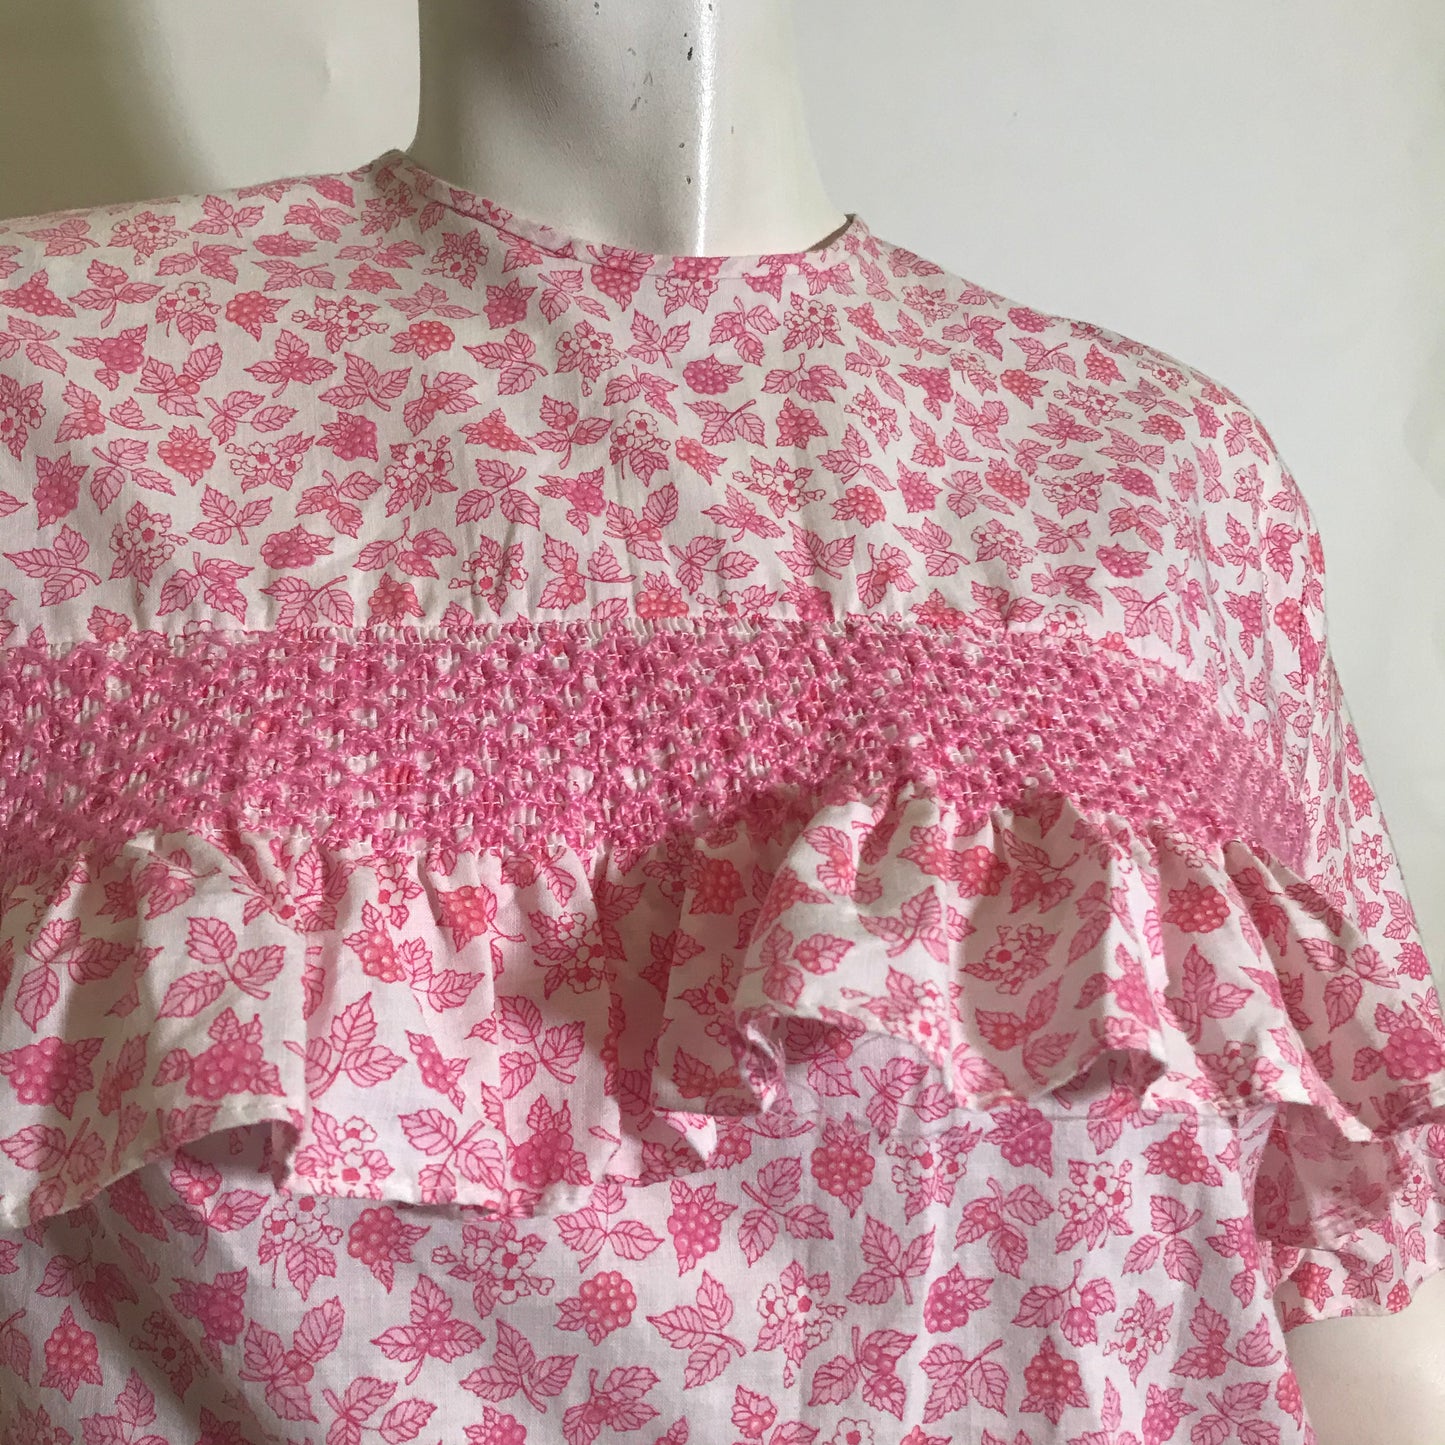 Ruffled Smocked Bodice Pink Floral Print Blouse circa 1960s